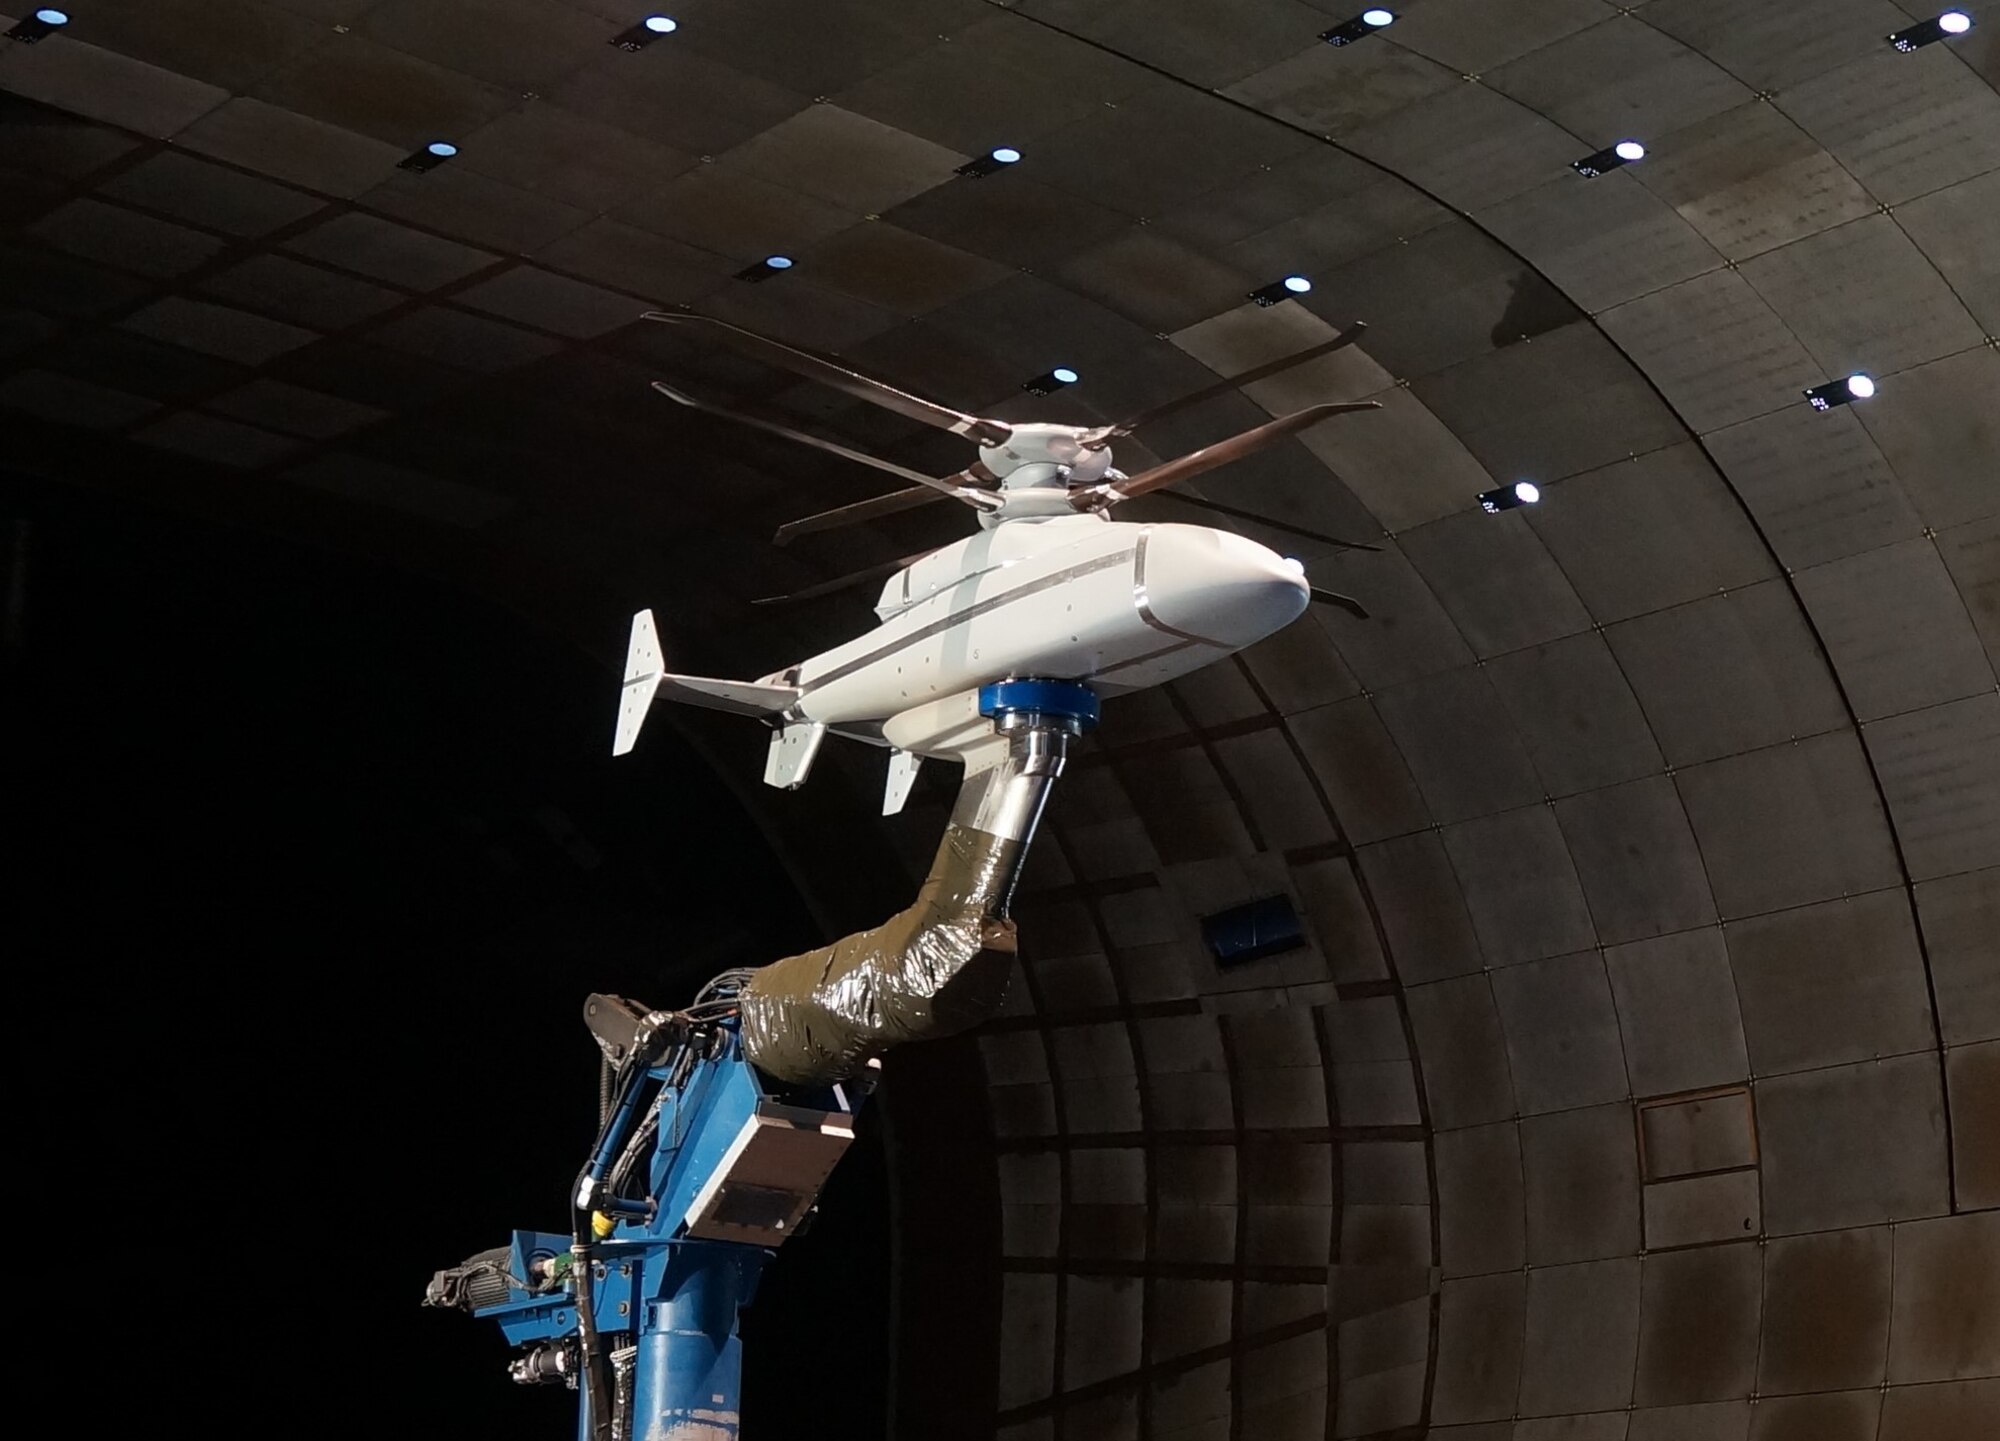 A scale model of the Sikorsky-Boeing SB>1 DEFIANT™ undergoes testing at the AEDC National Full-Scale Aerodynamics Complex at Moffett Field in Mountain View, California. The goal of the wind tunnel test was to validate the aerodynamic performance and flight mechanics of Sikorsky’s X2 Technology™ aircraft. These configurations, which are being utilized on the SB>1 DEFIANT™, include a lift-offset coaxial rotor system, composite fuselage and rear-mounted pusher propulsor that provides increased speed. (Courtesy photo)